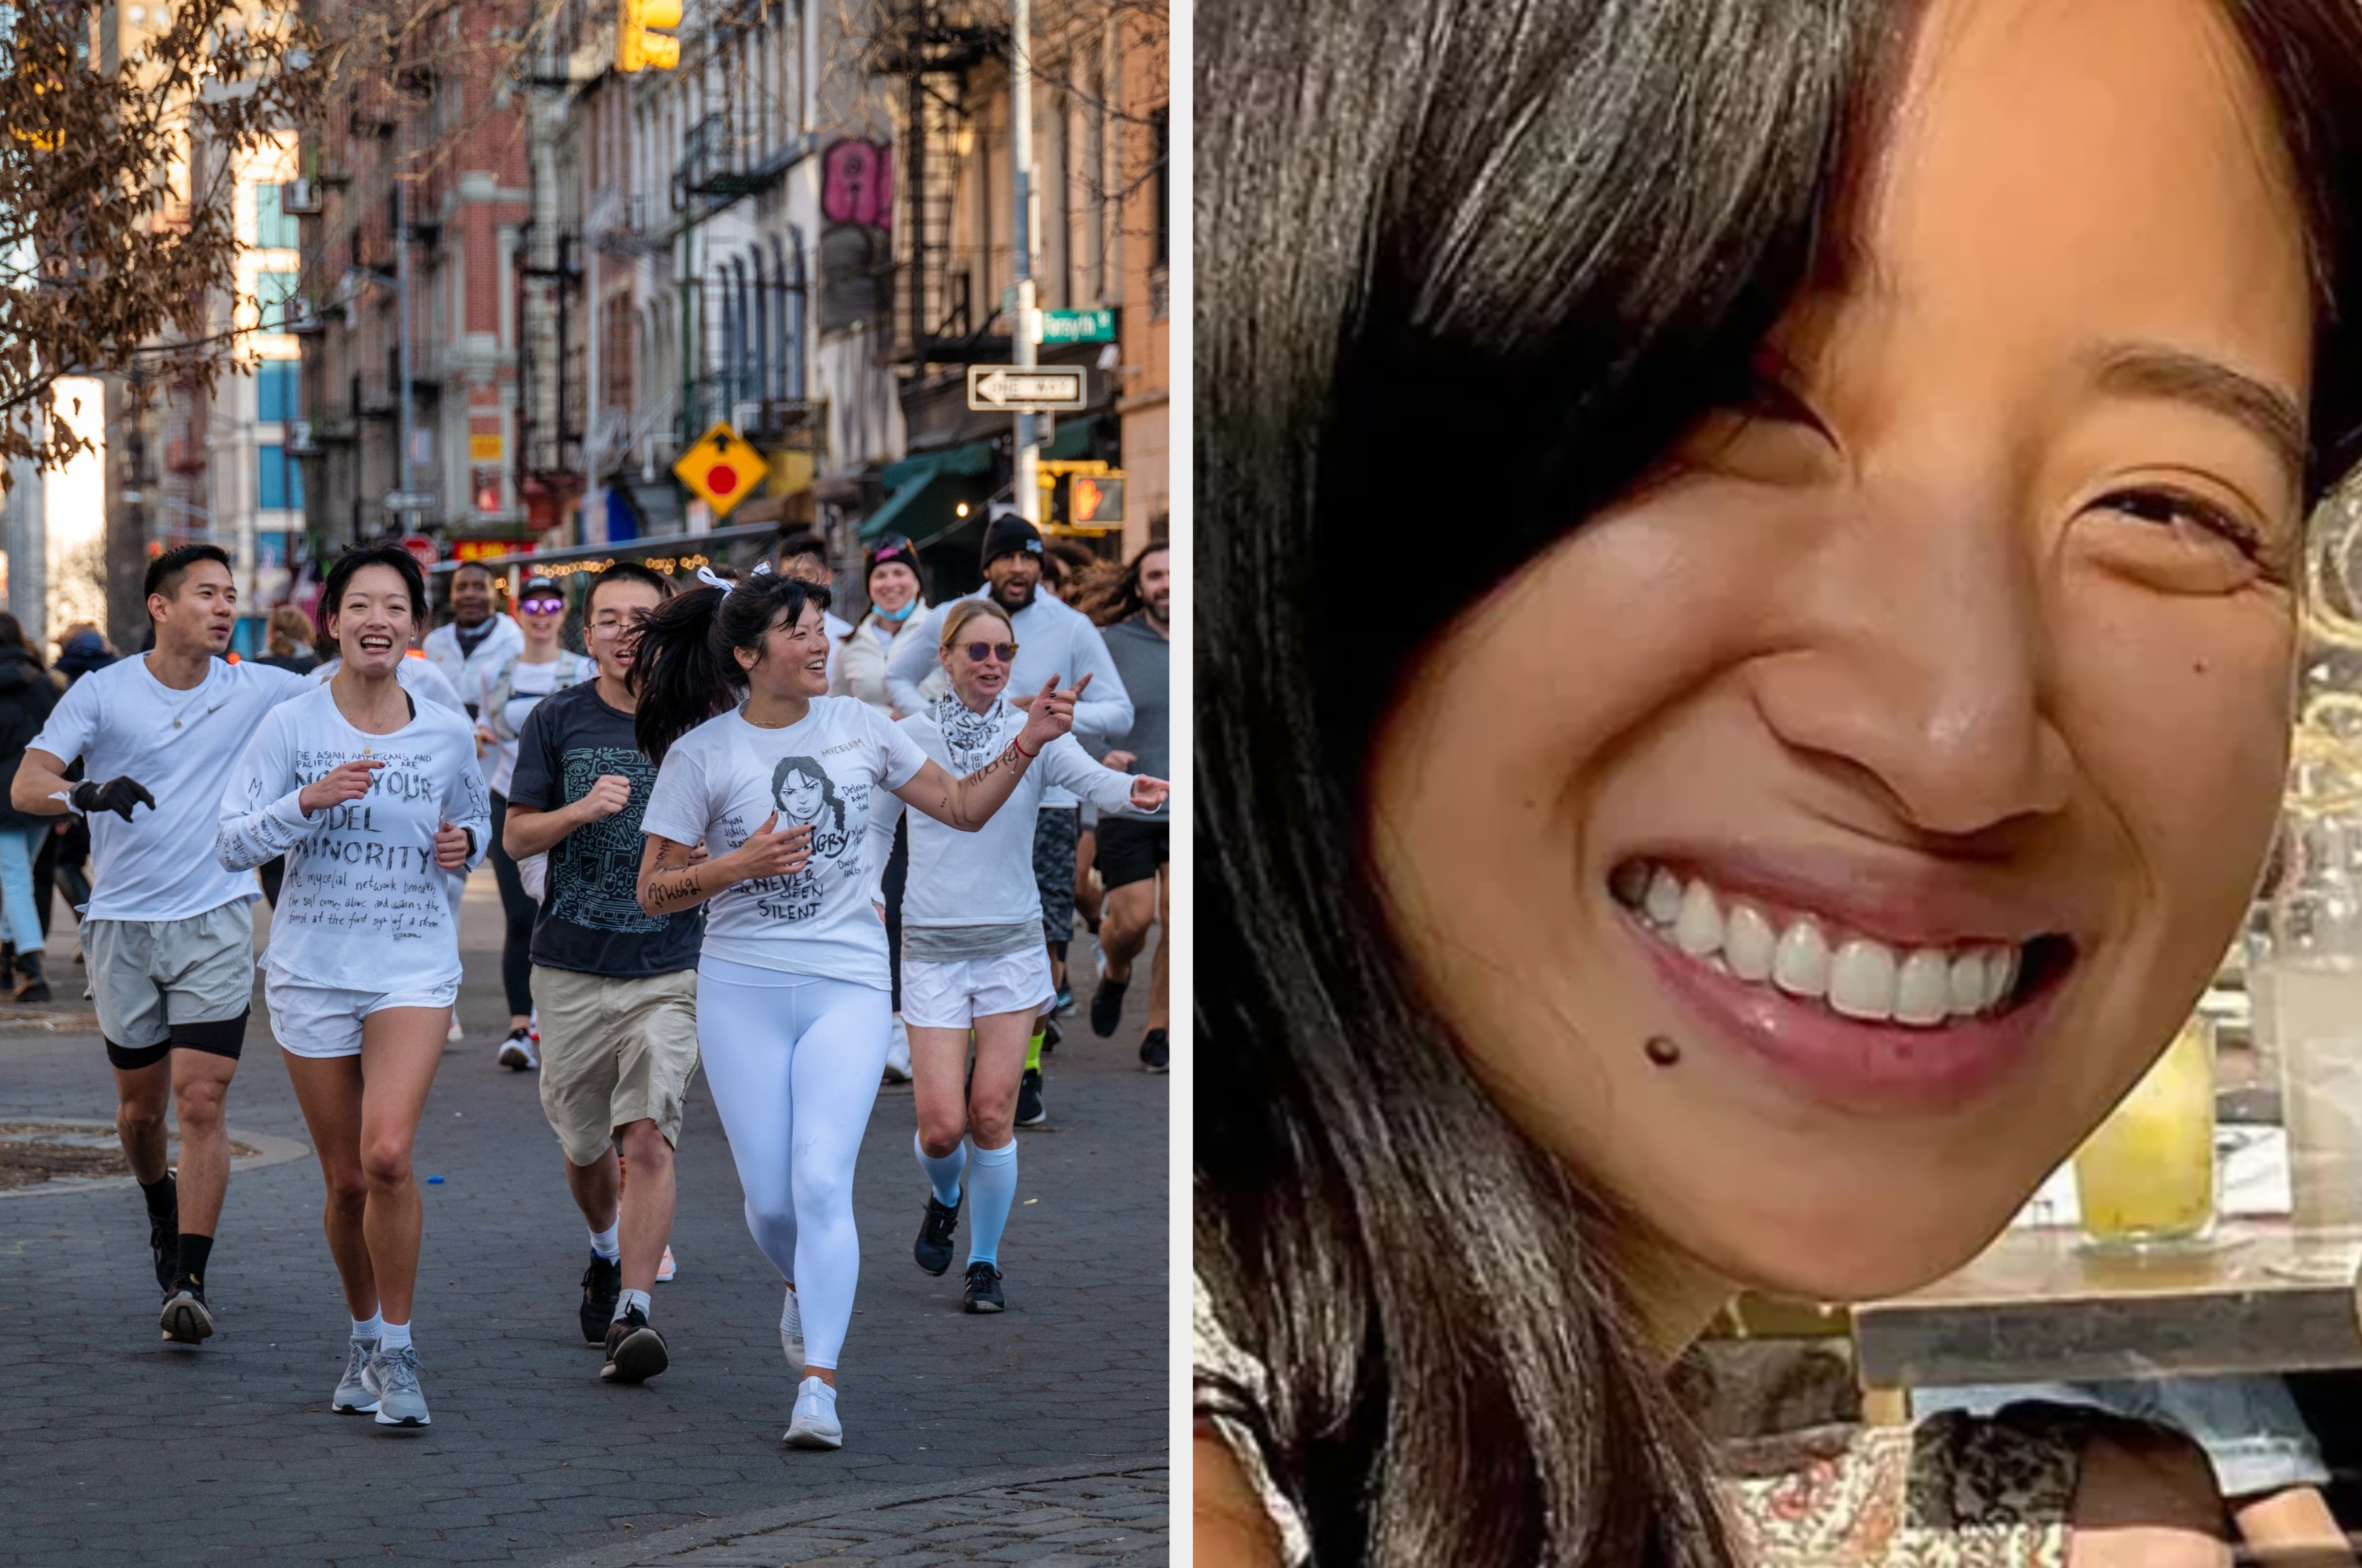 Christina Lee's Life Honored With Chinatown Run